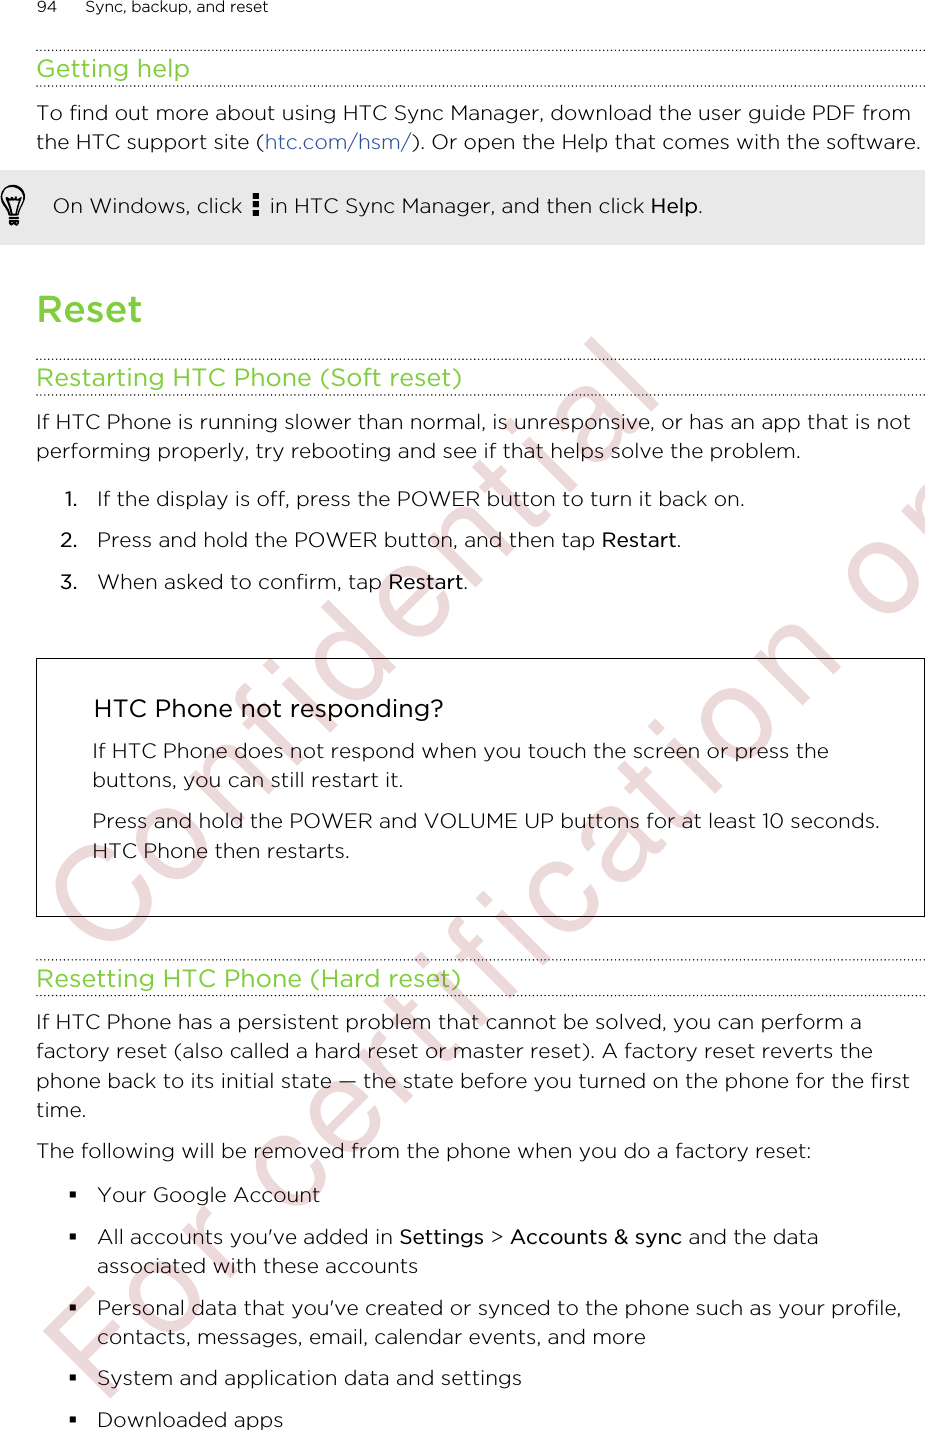 Getting helpTo find out more about using HTC Sync Manager, download the user guide PDF fromthe HTC support site (htc.com/hsm/). Or open the Help that comes with the software.On Windows, click   in HTC Sync Manager, and then click Help.ResetRestarting HTC Phone (Soft reset)If HTC Phone is running slower than normal, is unresponsive, or has an app that is notperforming properly, try rebooting and see if that helps solve the problem.1. If the display is off, press the POWER button to turn it back on.2. Press and hold the POWER button, and then tap Restart.3. When asked to confirm, tap Restart.HTC Phone not responding?If HTC Phone does not respond when you touch the screen or press thebuttons, you can still restart it.Press and hold the POWER and VOLUME UP buttons for at least 10 seconds.HTC Phone then restarts.Resetting HTC Phone (Hard reset)If HTC Phone has a persistent problem that cannot be solved, you can perform afactory reset (also called a hard reset or master reset). A factory reset reverts thephone back to its initial state — the state before you turned on the phone for the firsttime.The following will be removed from the phone when you do a factory reset:§Your Google Account§All accounts you&apos;ve added in Settings &gt; Accounts &amp; sync and the dataassociated with these accounts§Personal data that you&apos;ve created or synced to the phone such as your profile,contacts, messages, email, calendar events, and more§System and application data and settings§Downloaded apps94 Sync, backup, and reset        Confidential  For certification only